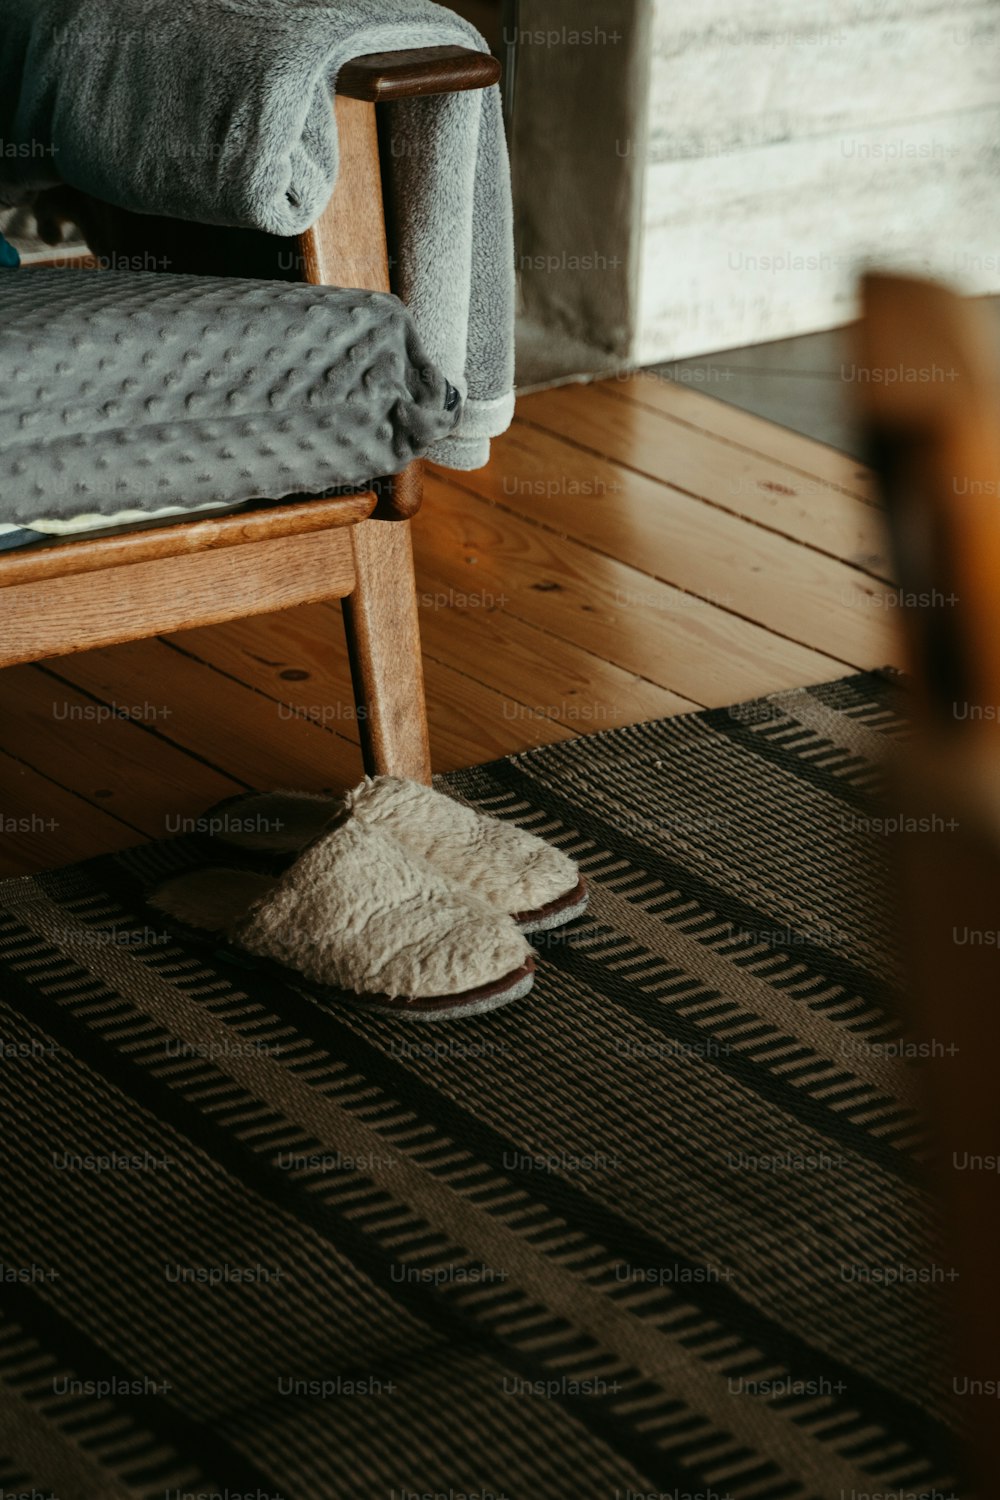 a pair of slippers sitting on top of a wooden floor